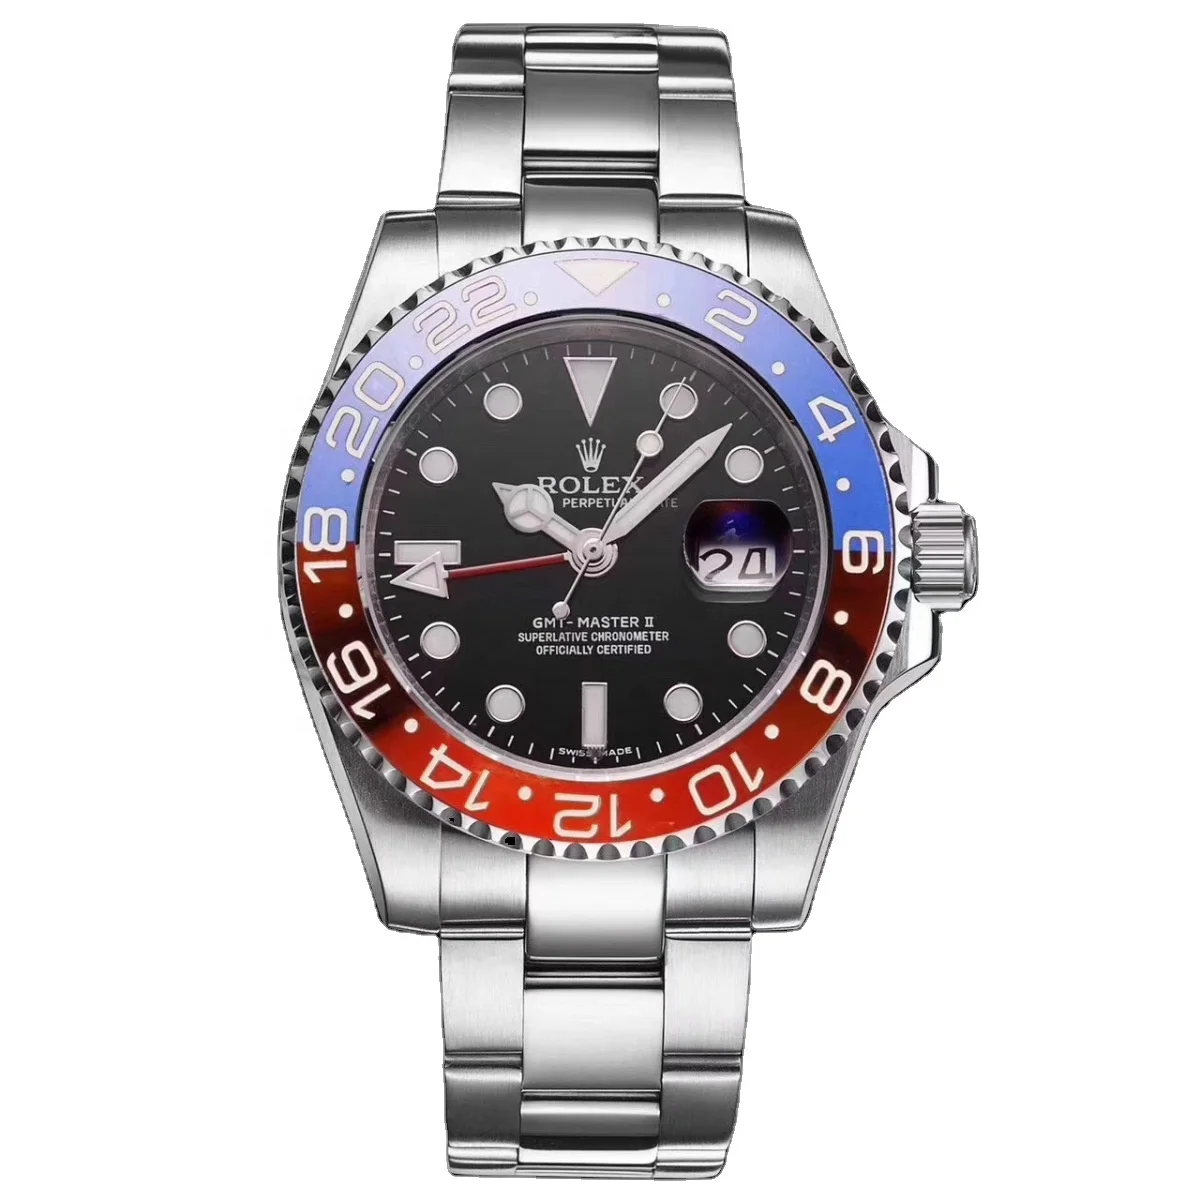 

Free shipping luxury Watch 904L steel 126710BLRO ETA 3285 movement for men GMT Master watches Rolexables